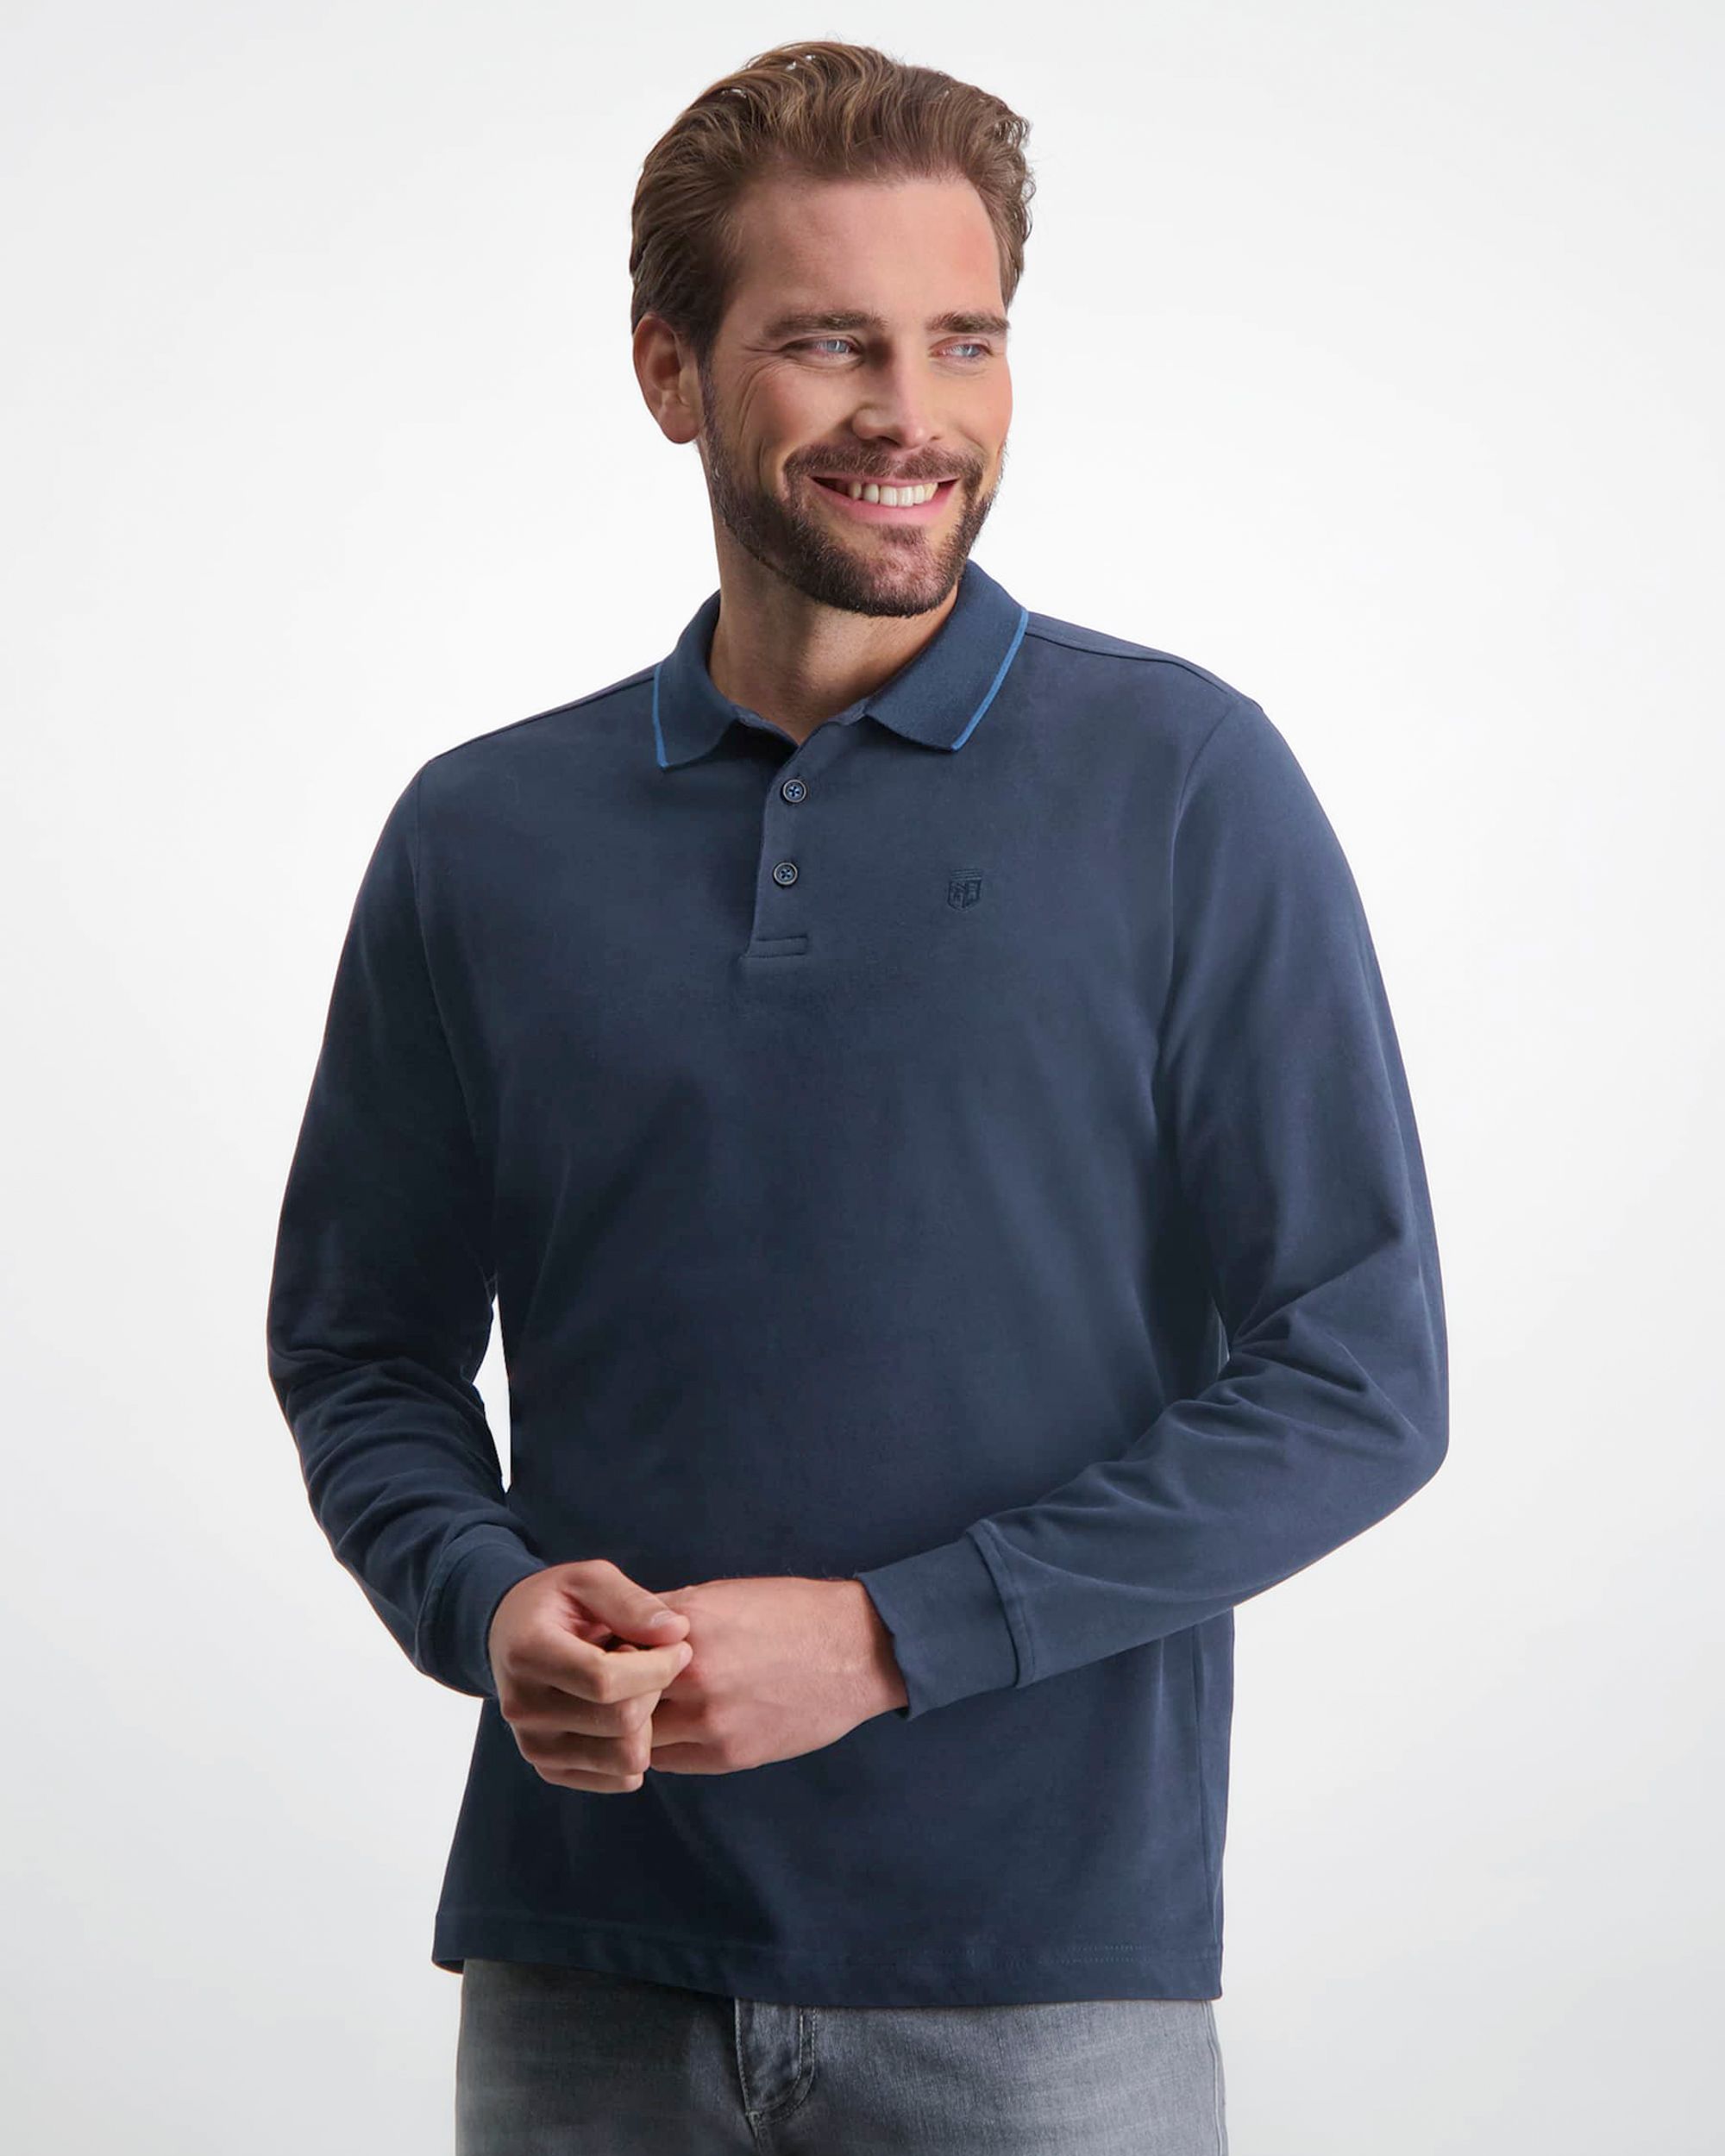 State of Art Polo LM Donker blauw 081115-001-4XL